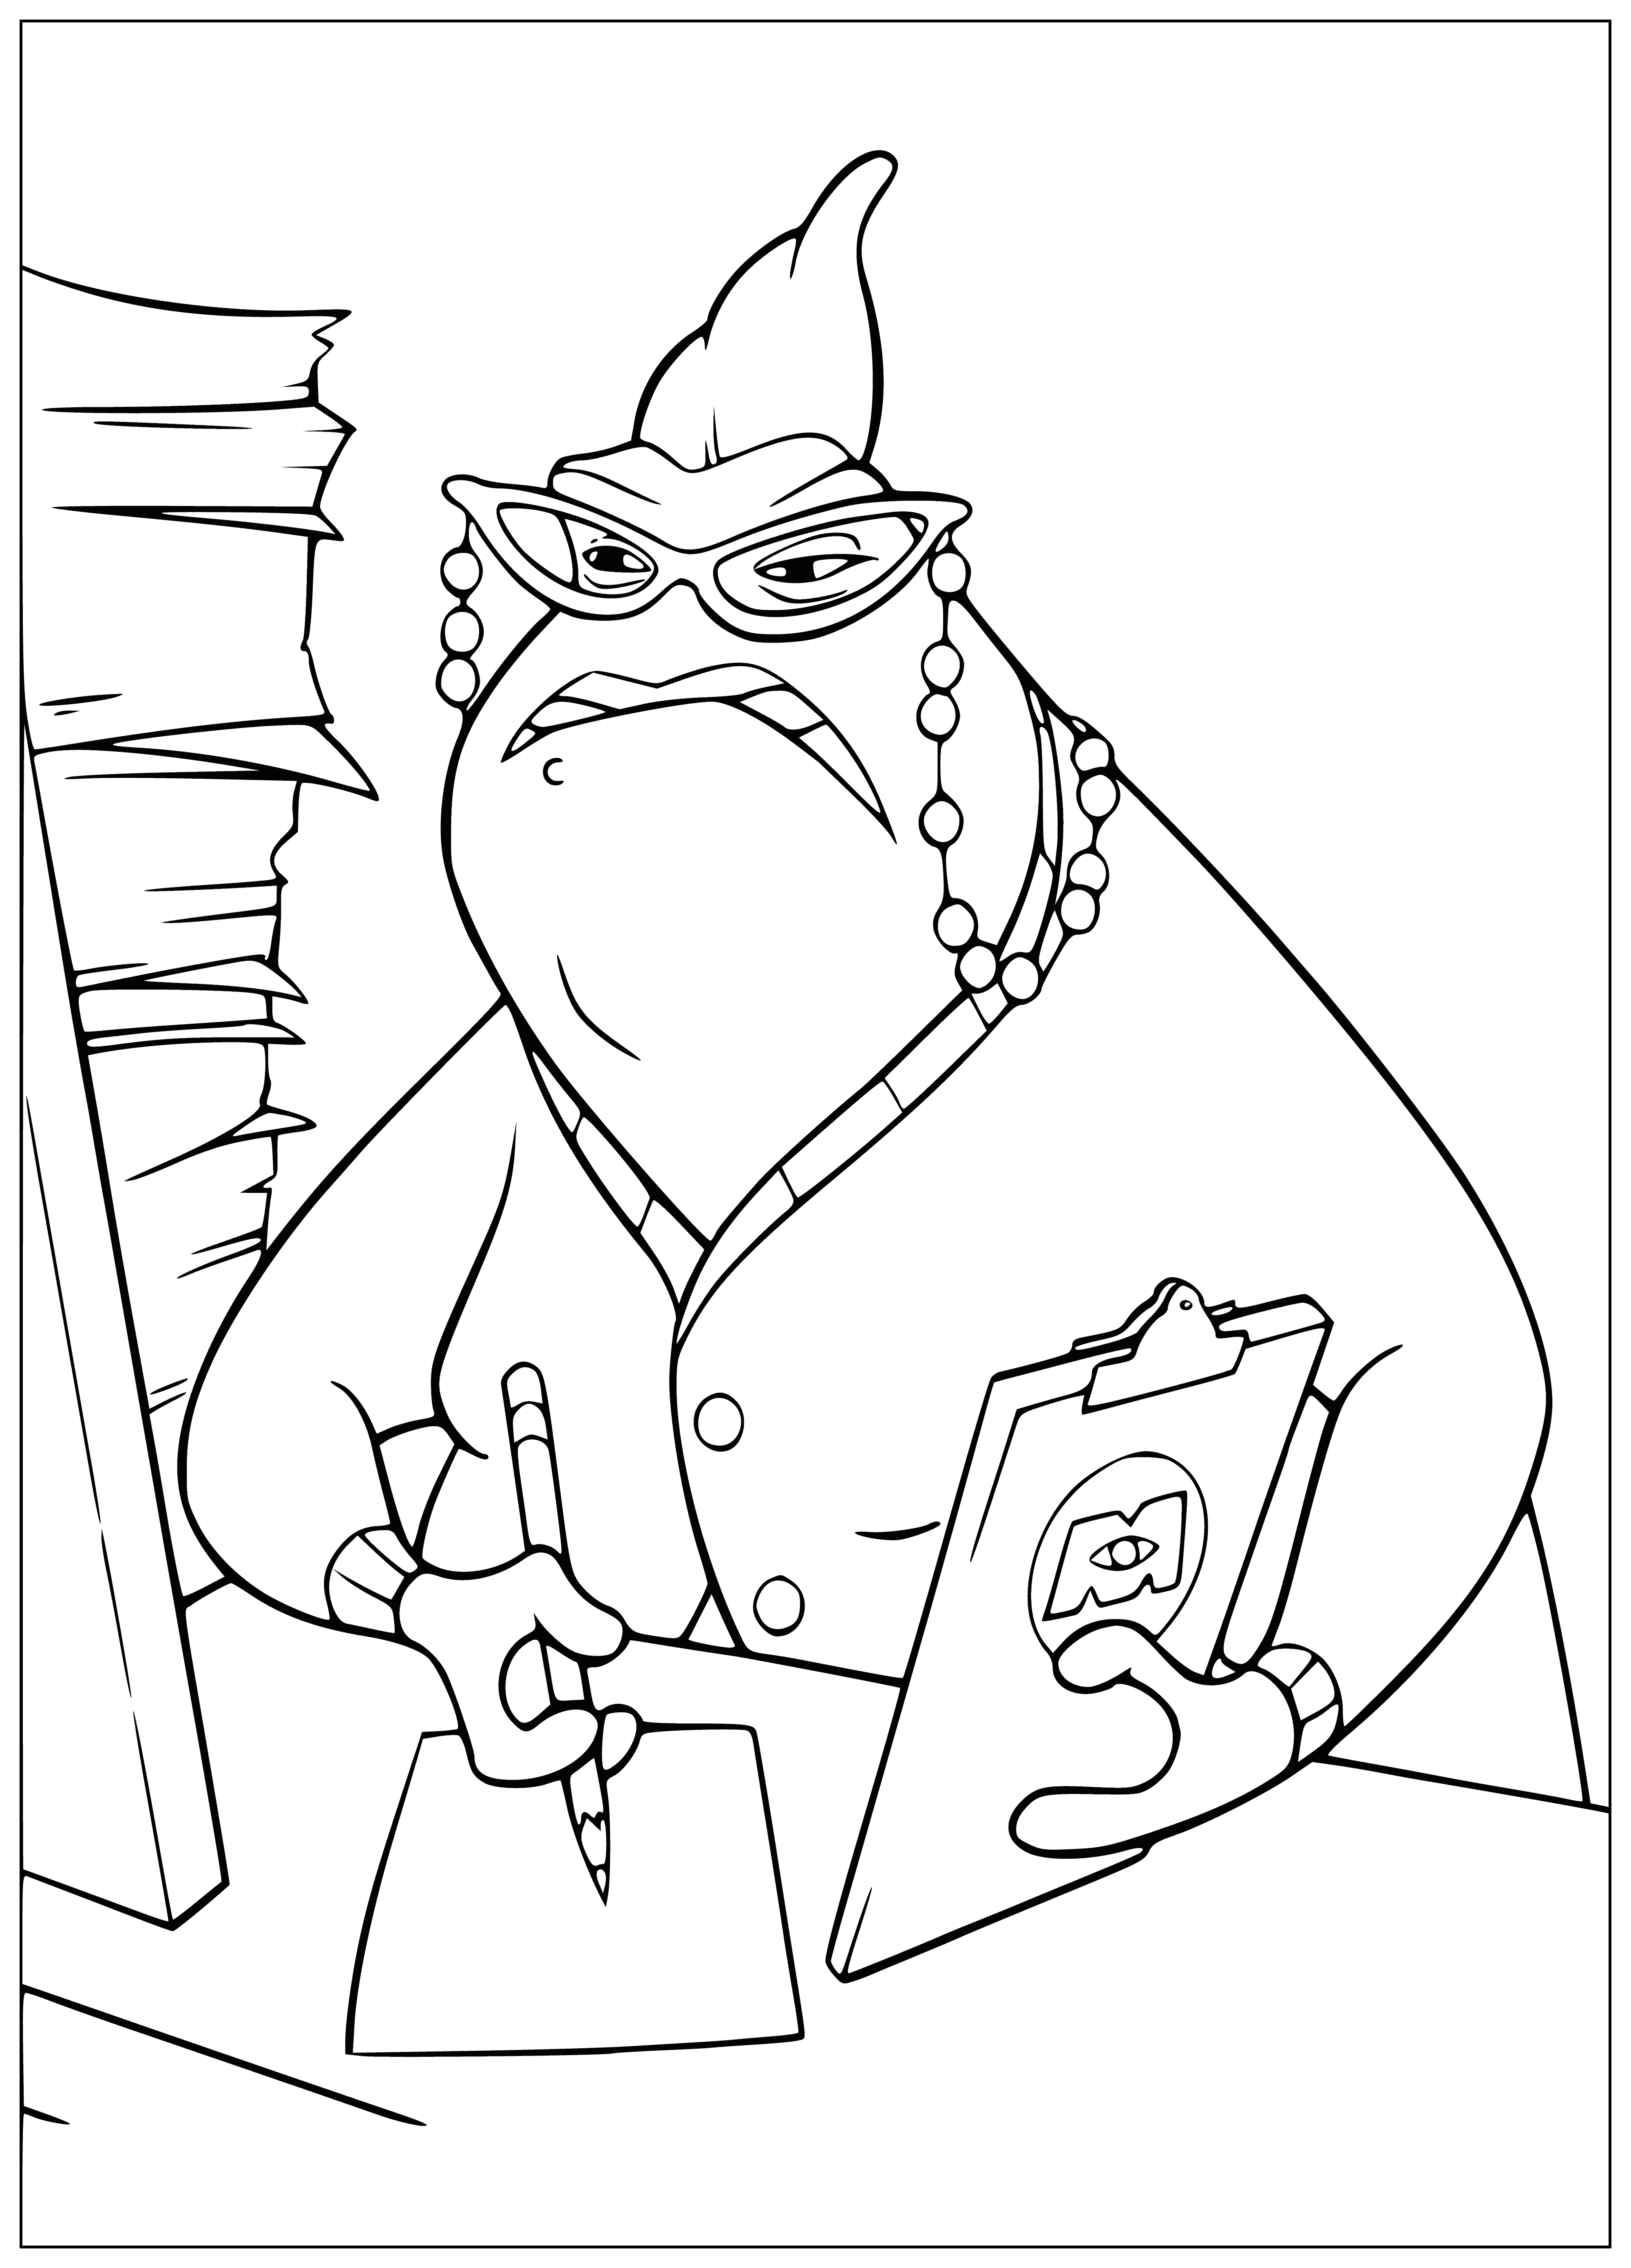 coloring page: Green, four-eyed monster wearing a black suit & holding a clipboard. Sharp teeth & a long nose complete the look.